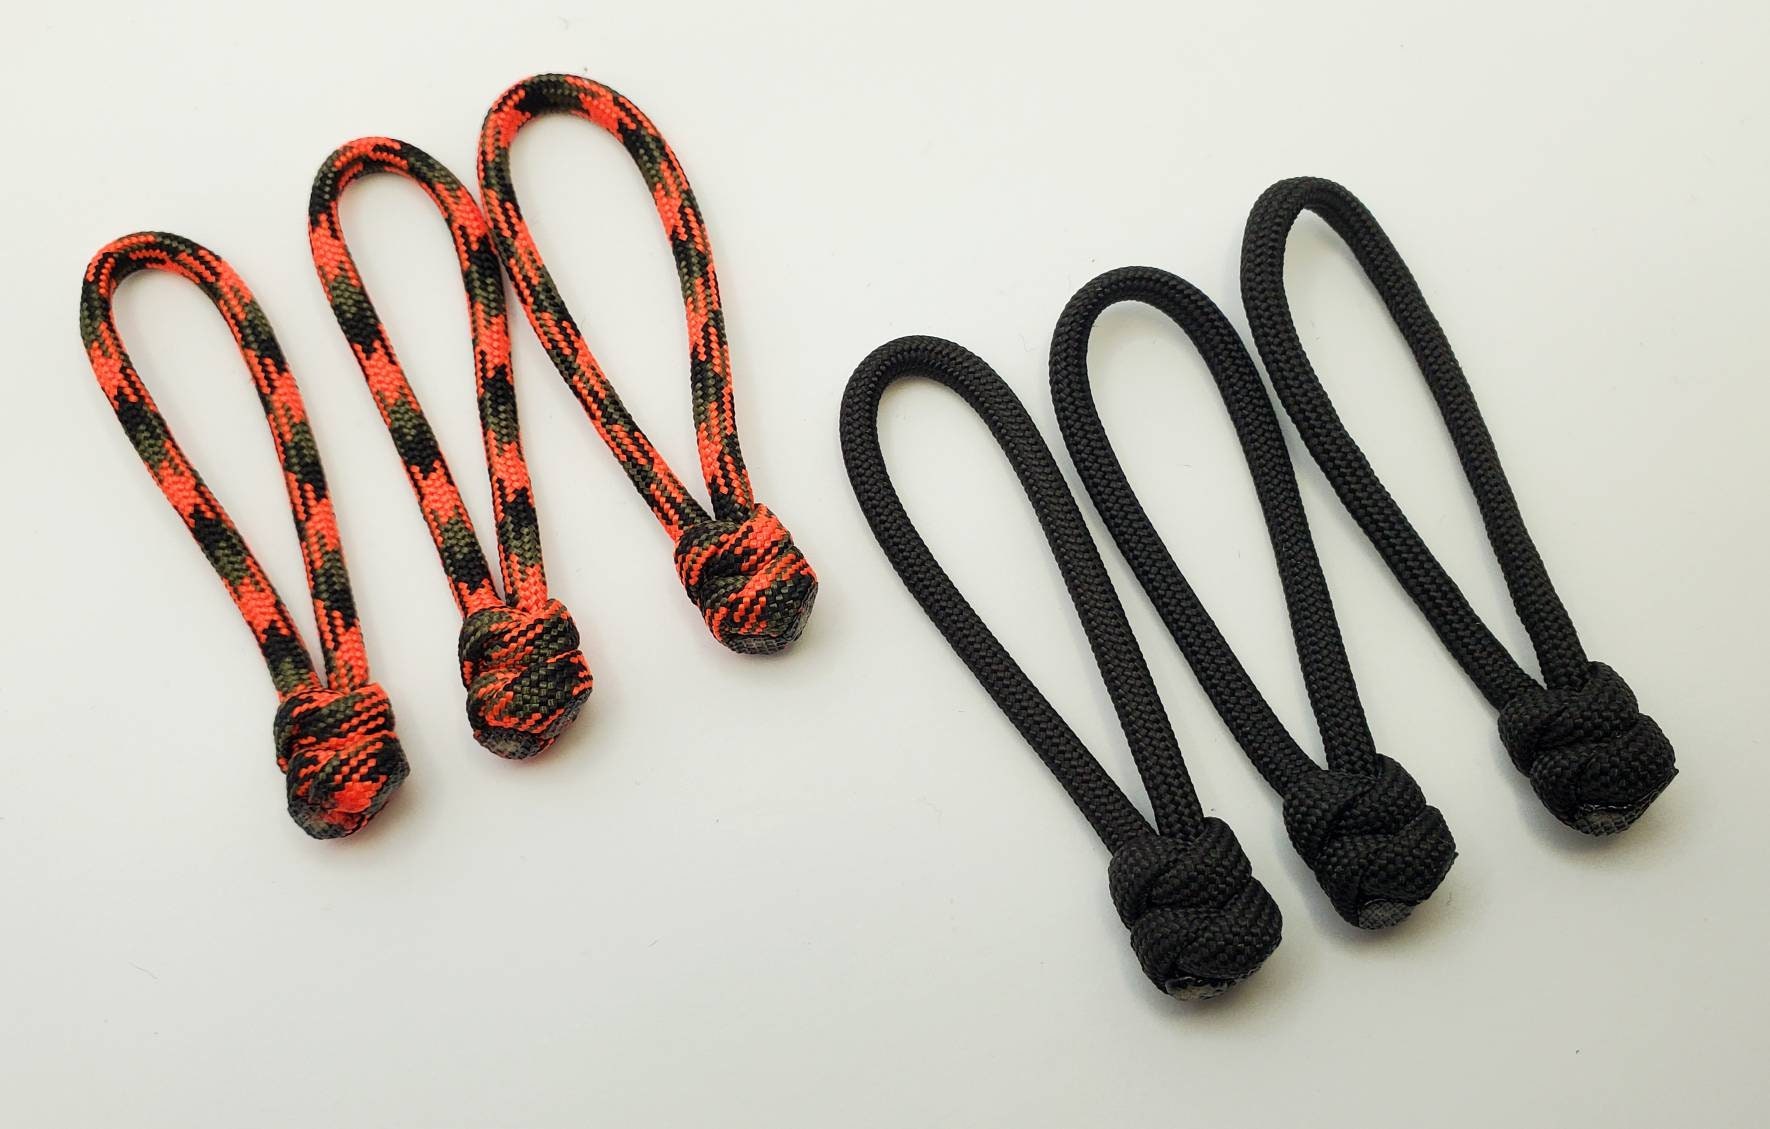 2 TACTICAL 550 PARACORD ZIPPER PULLS WITH EMERSON SKULLS or lanyards 